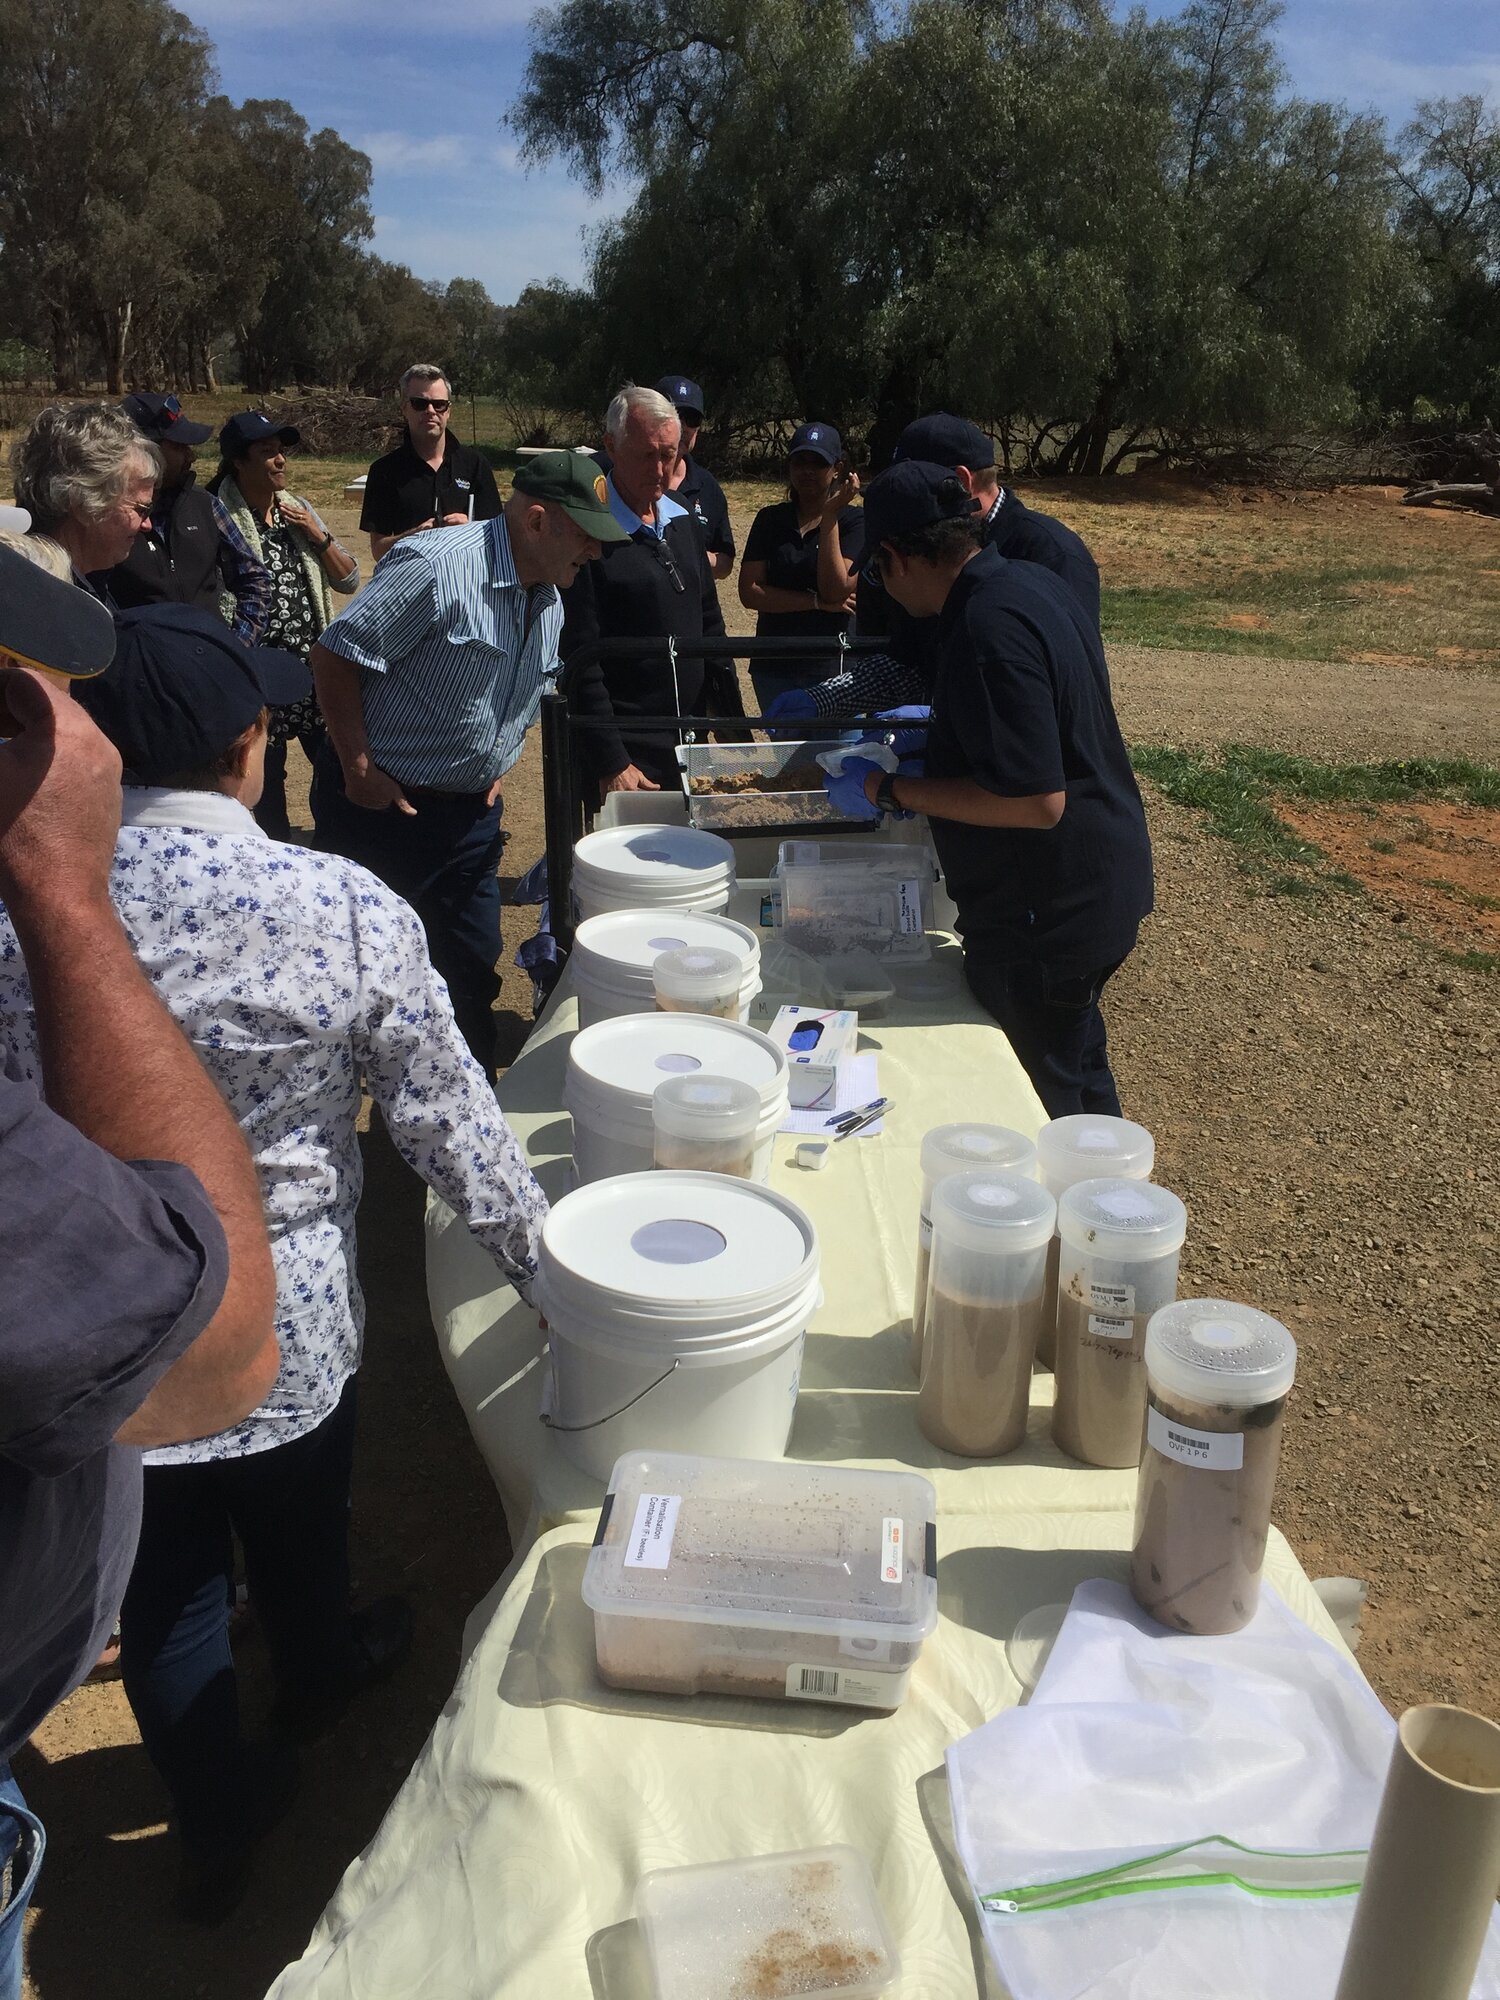 The mass rearing team at Charles Sturt Wagga Wagga showed off their skills in sorting brood balls from the rearing jars and other dung beetle tricks.